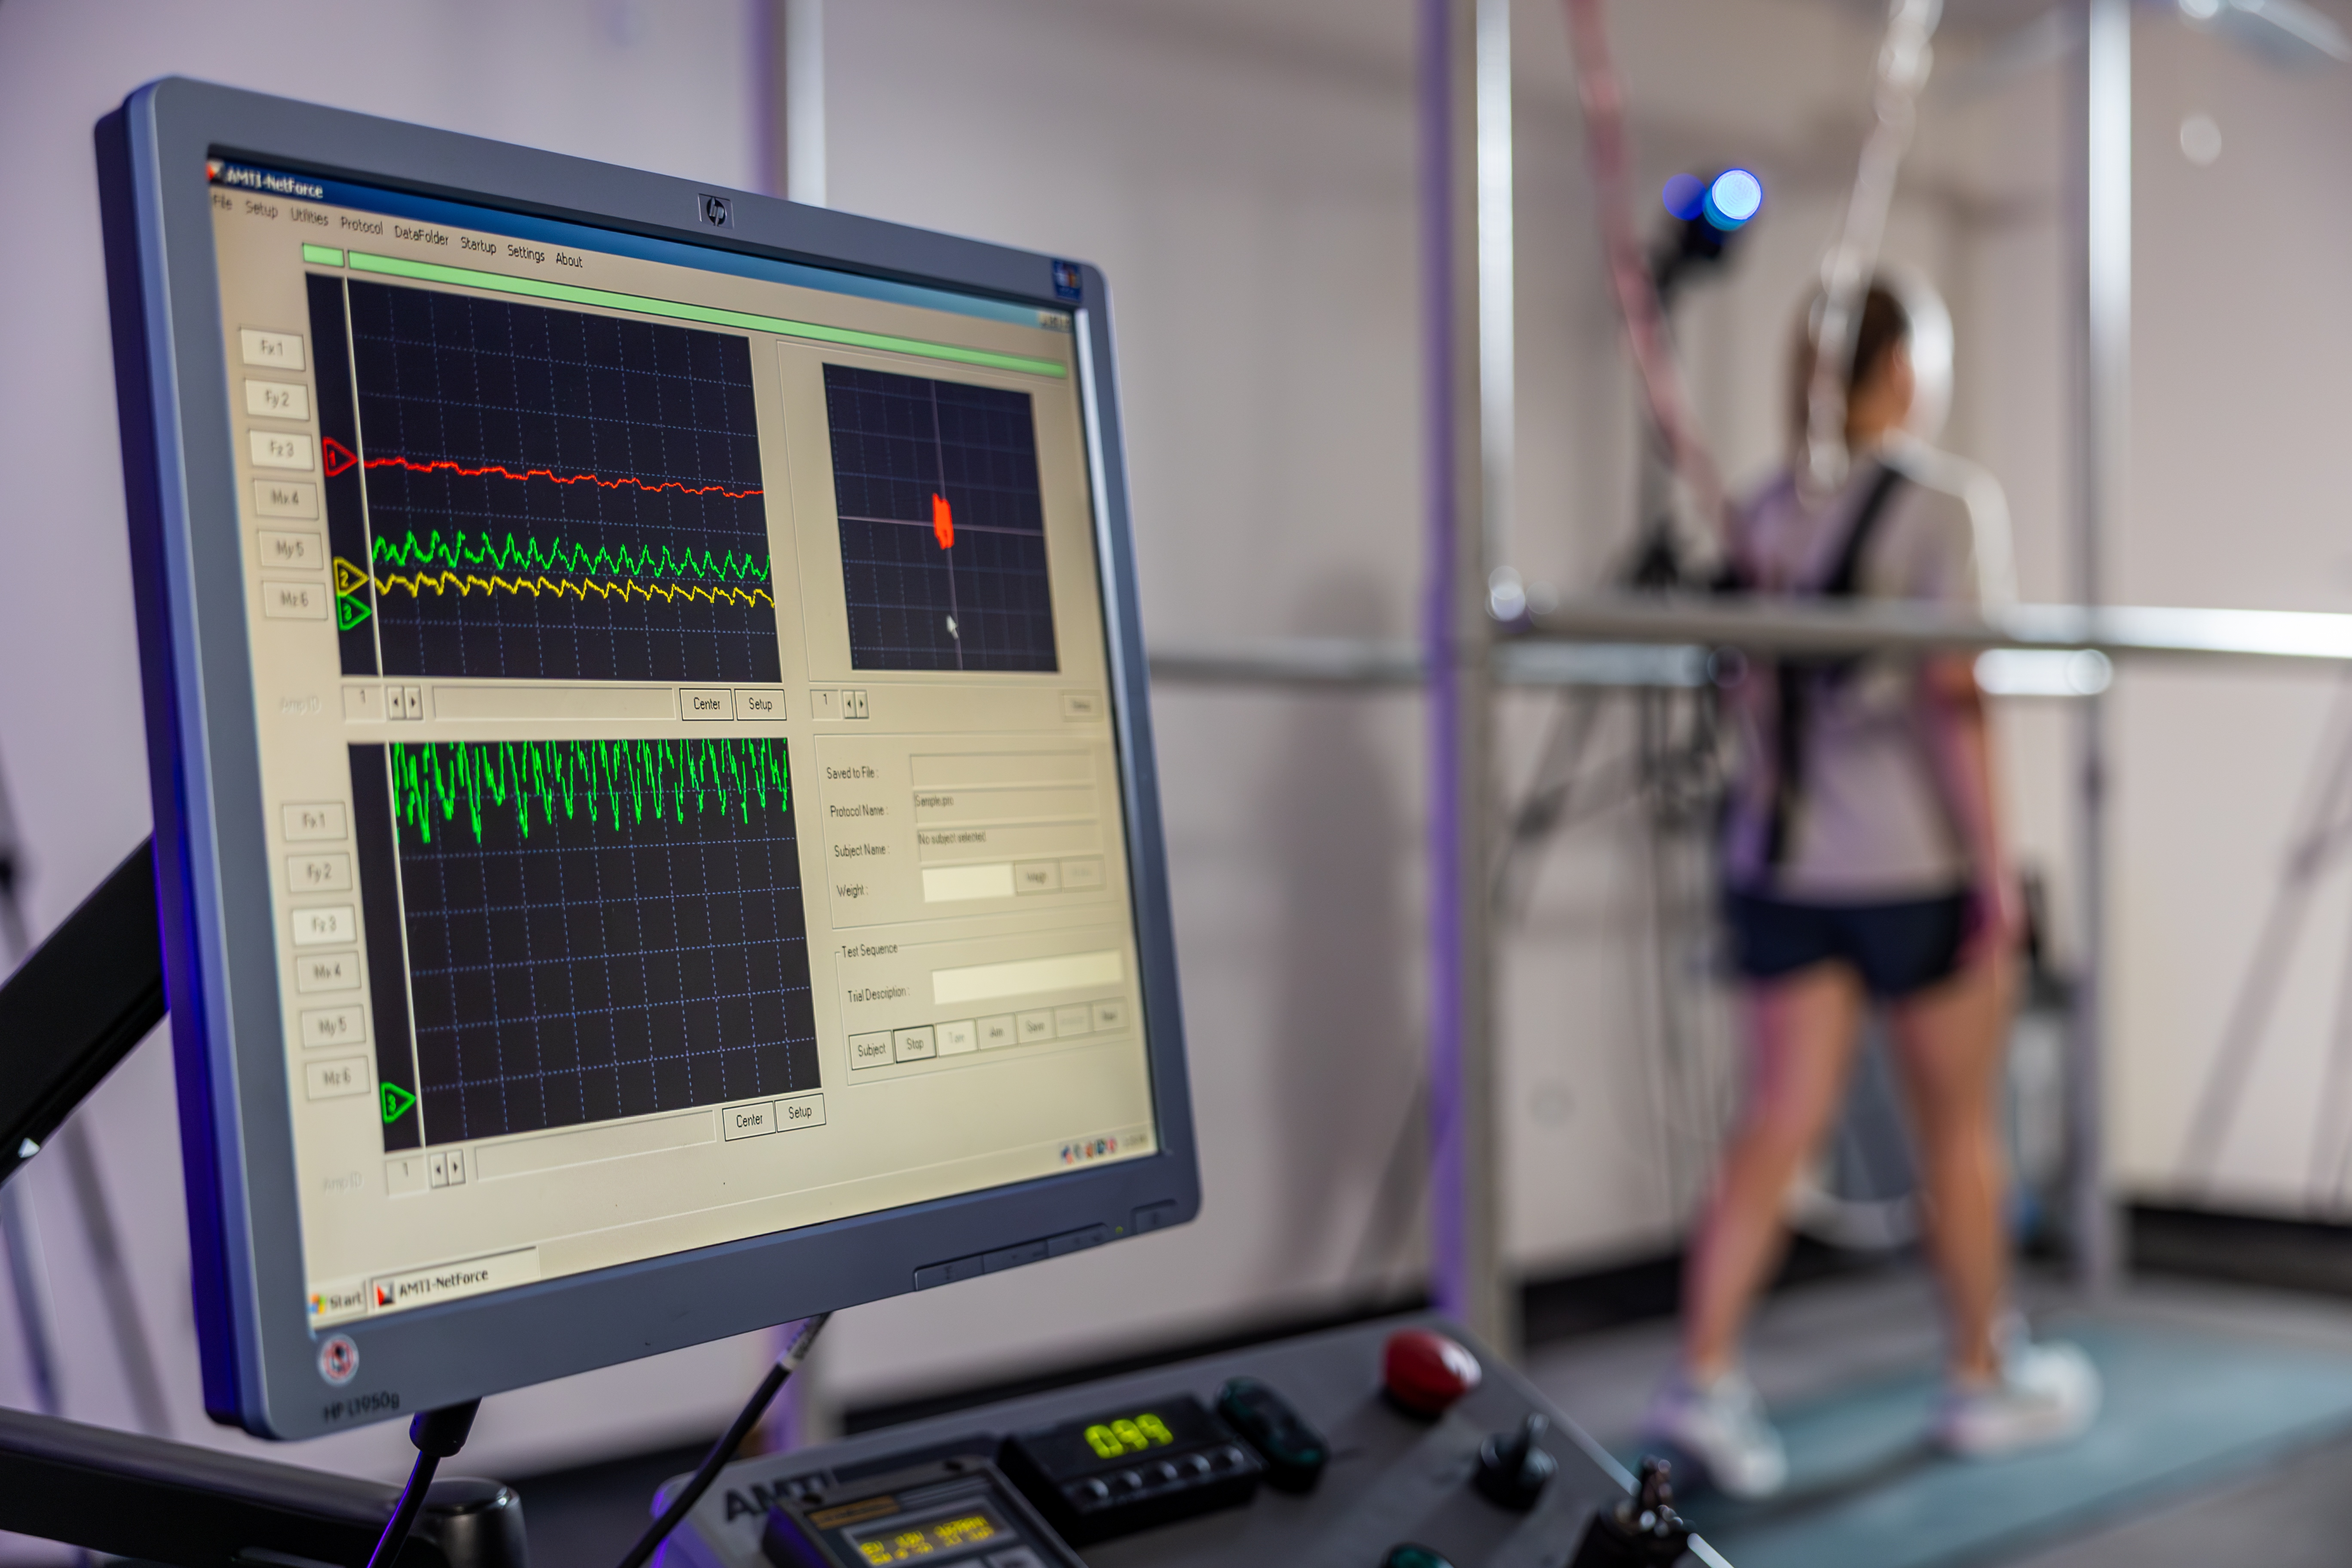 Research data and participant in the Department of Kinesiology's Locomotor Performance Lab